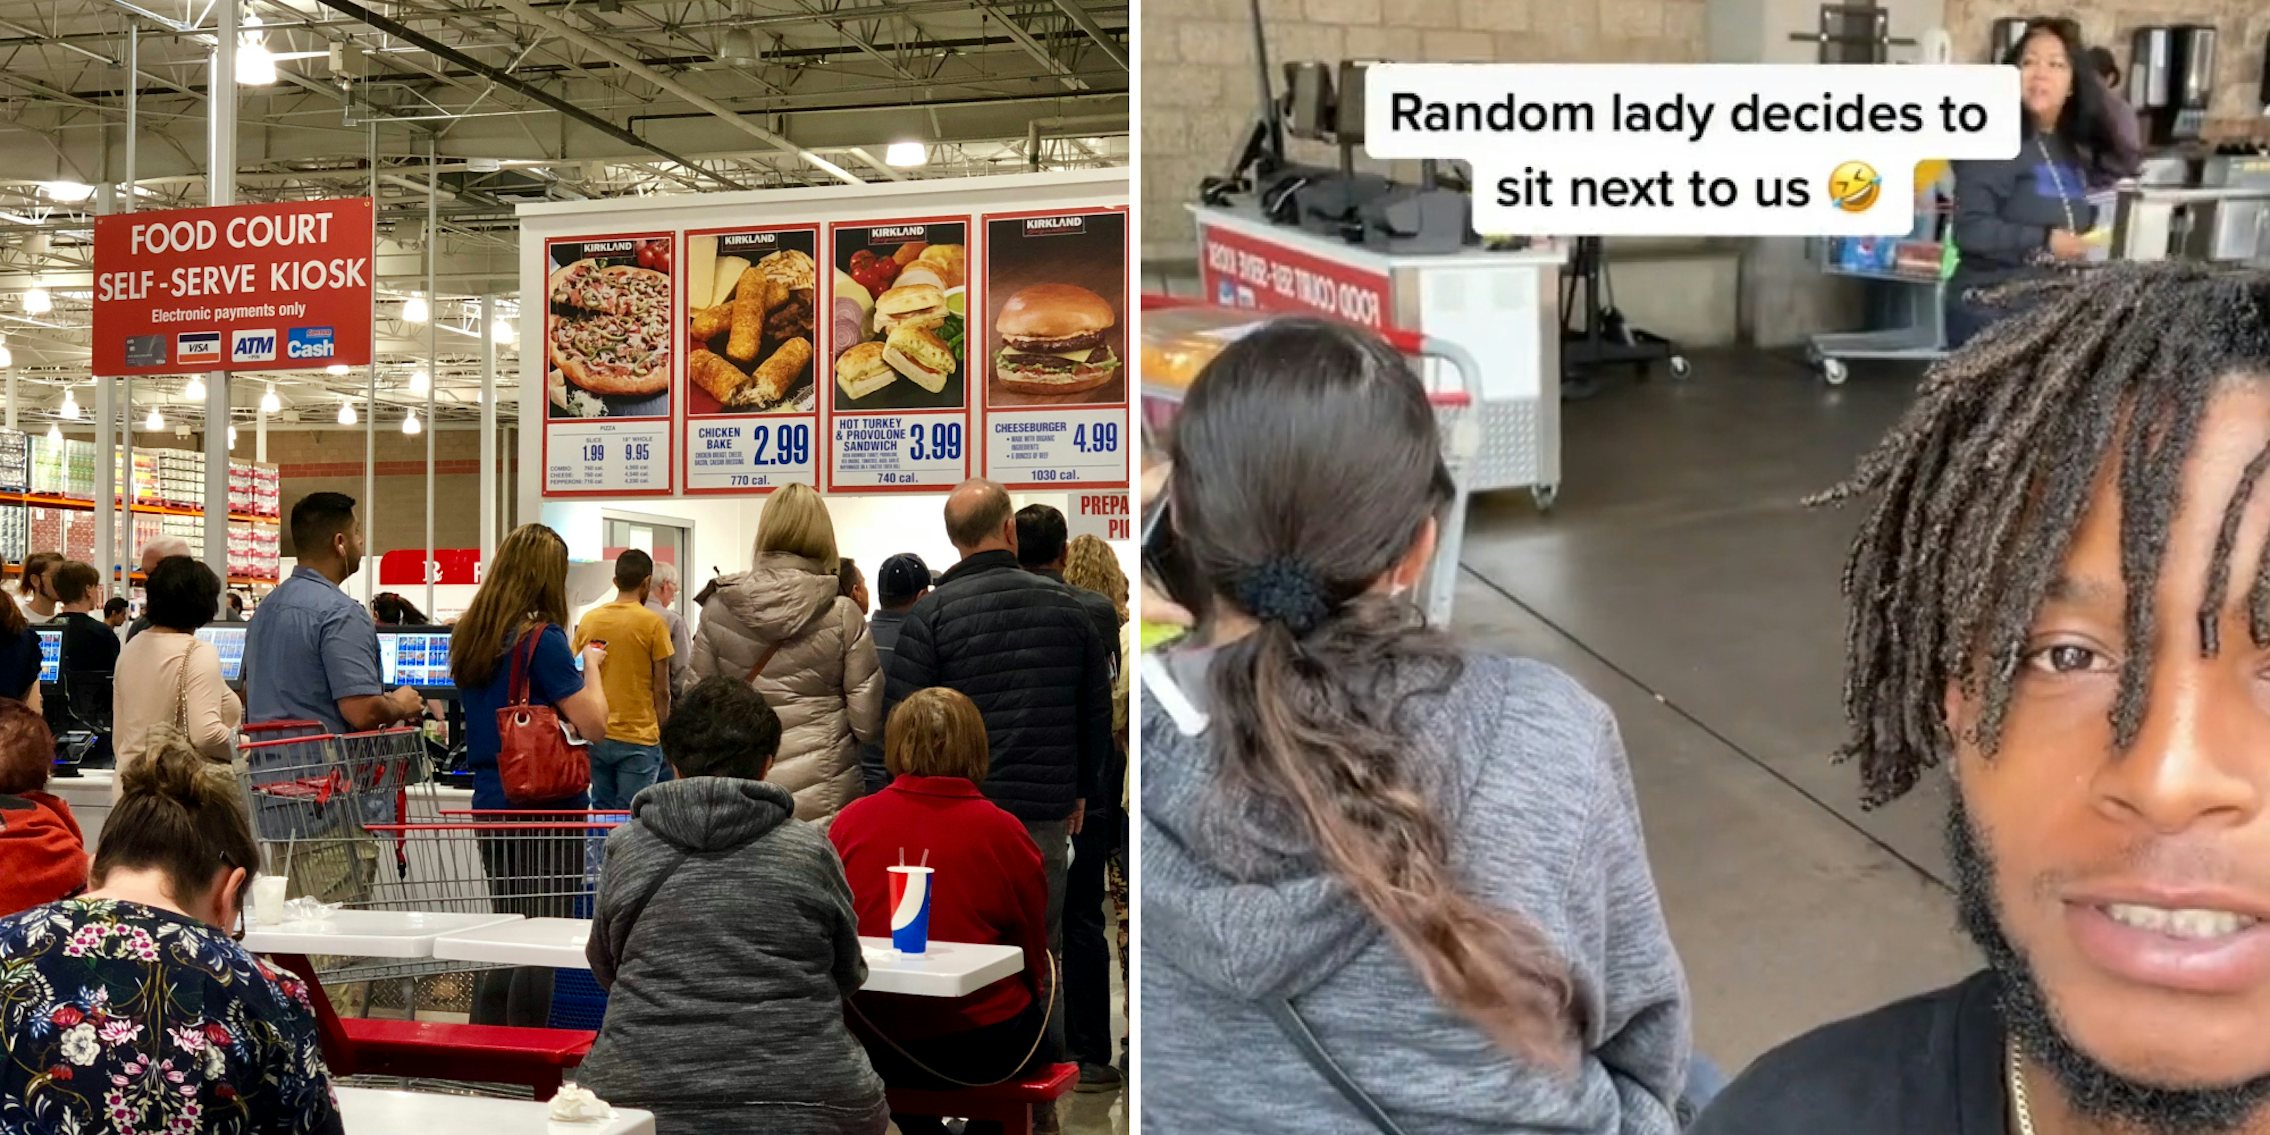 Costco food court with people sitting (l) Man in food court with woman next to him caption 'Random lady decides to sit next to us' (r)